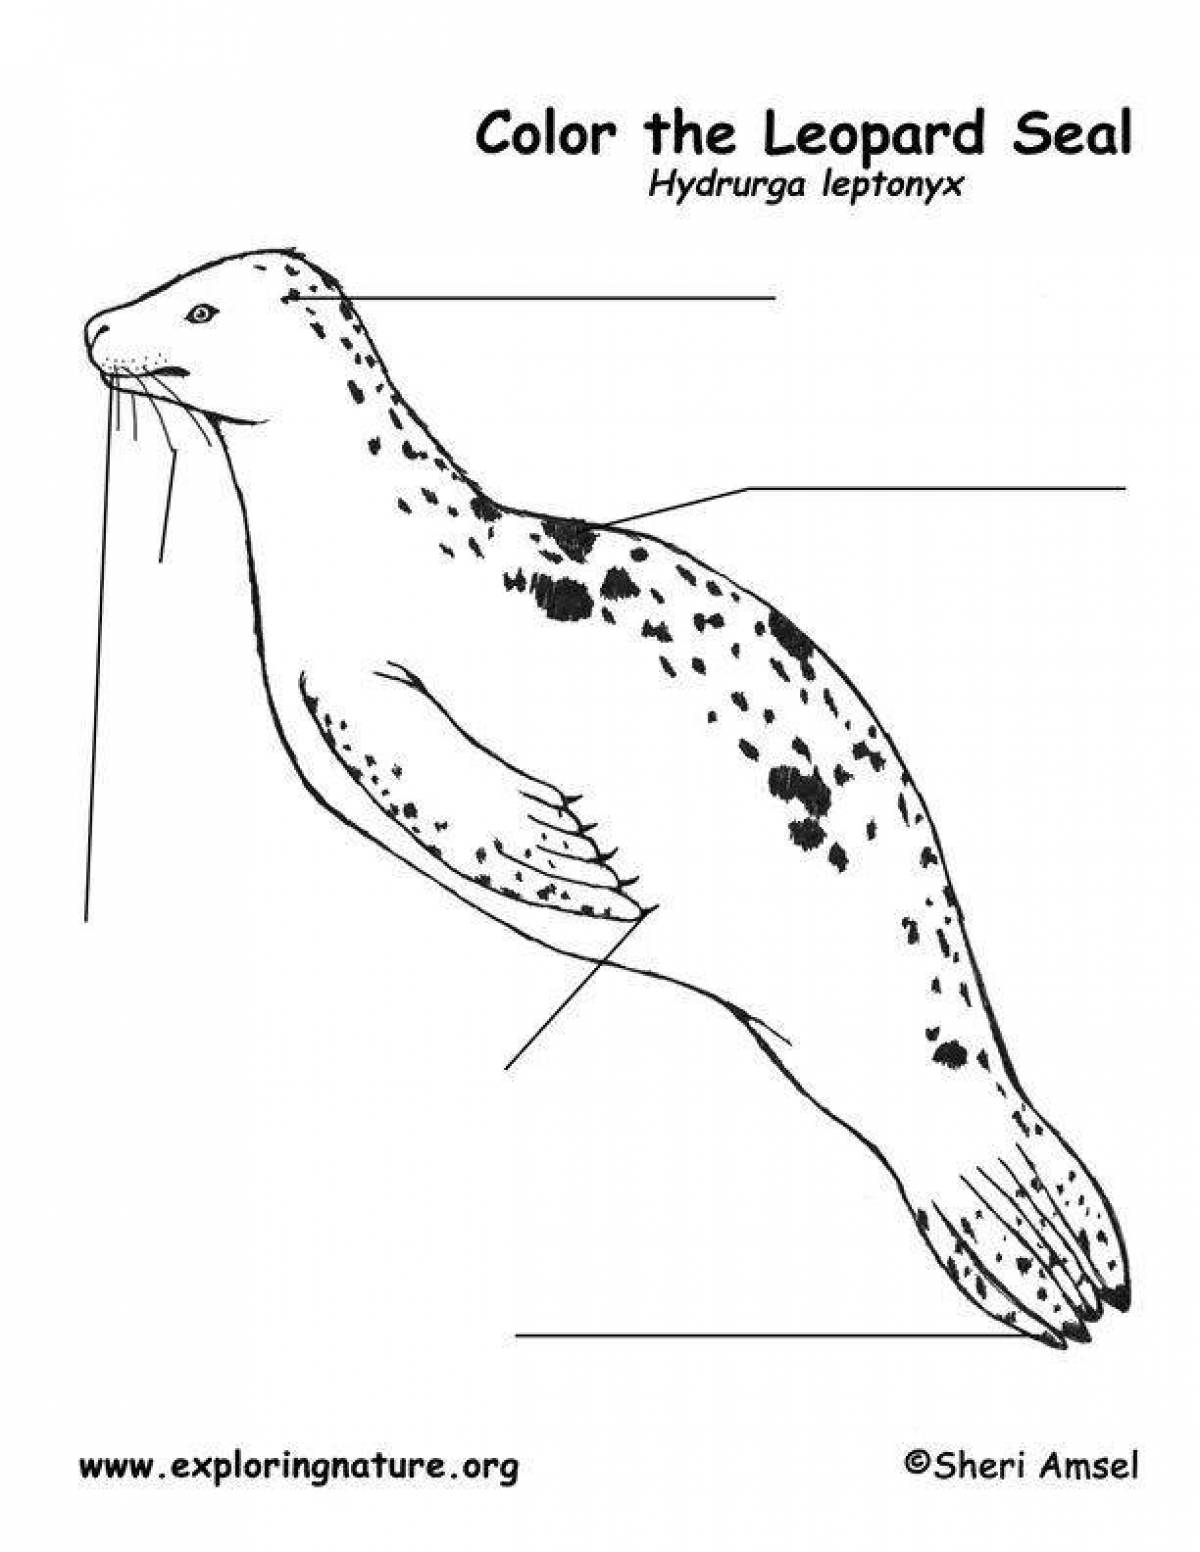 Coloring book spectacular leopard seal